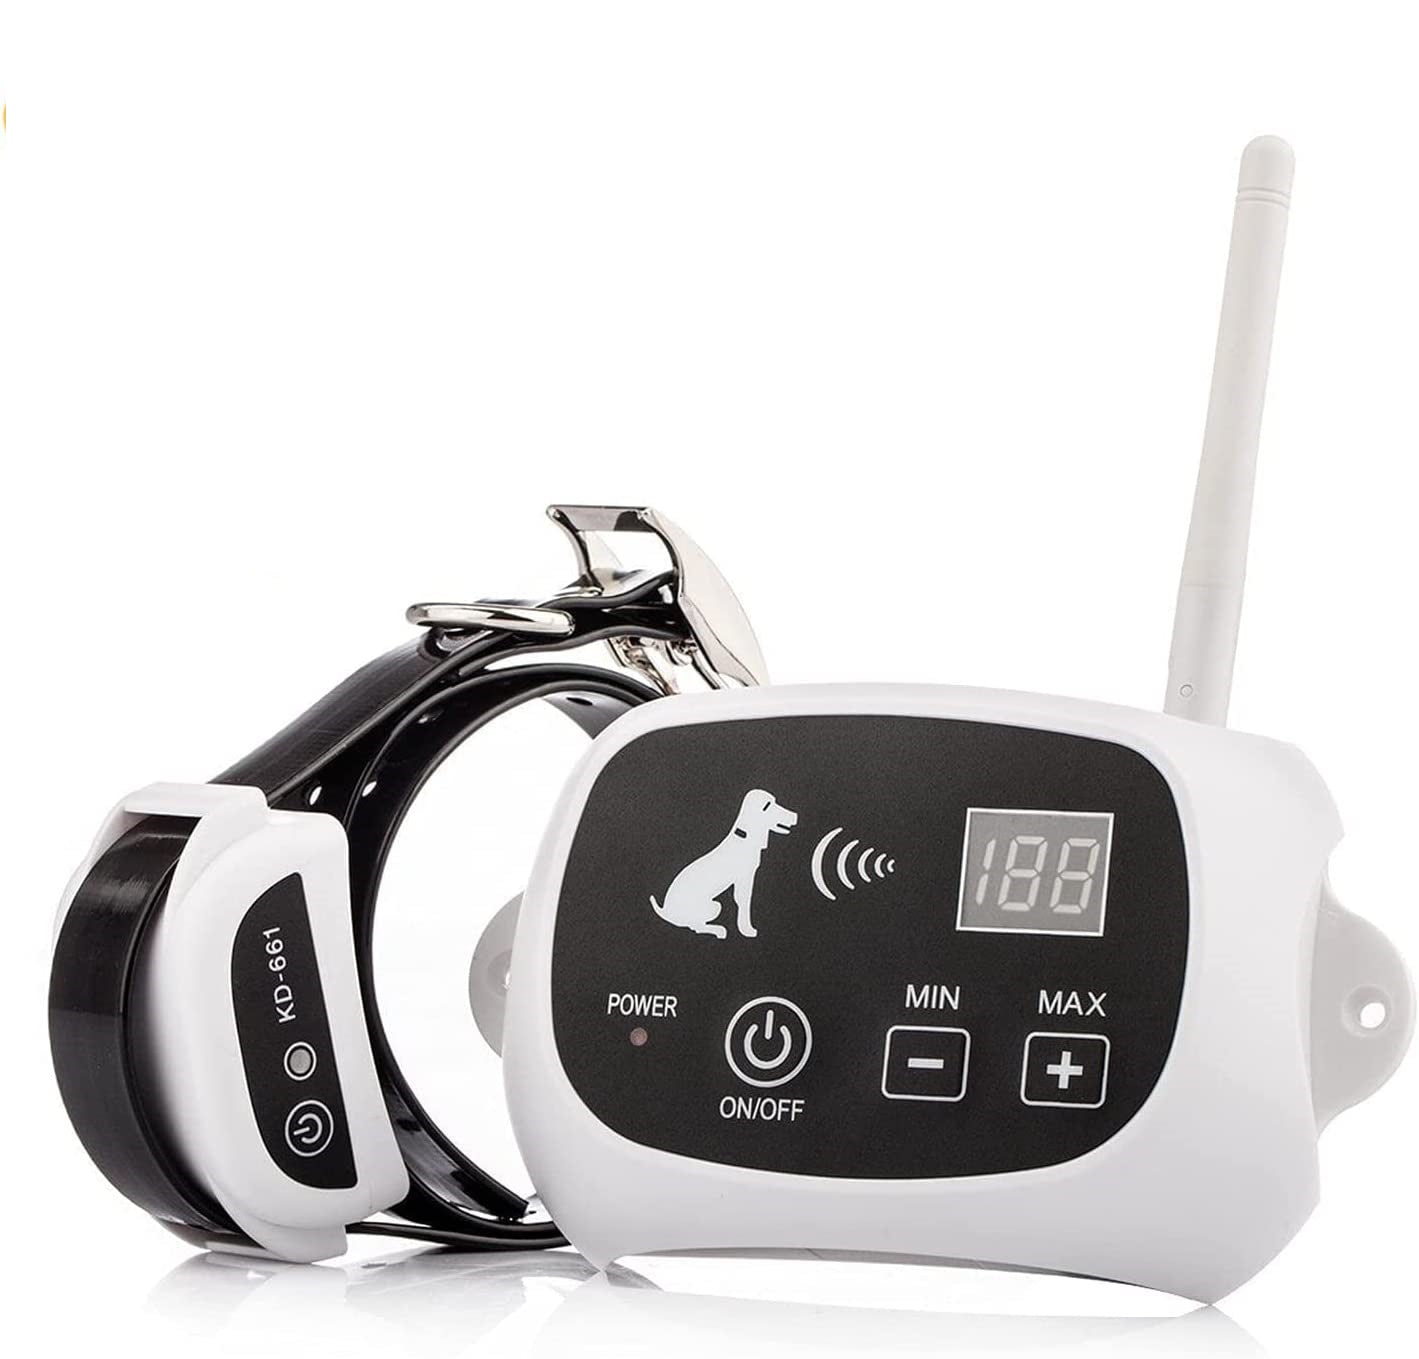 Wireless Dog Fence Waterproof Electric Dog Training Collar Electronic Safety Pet Fence for Small Meduim and Larger Dogs